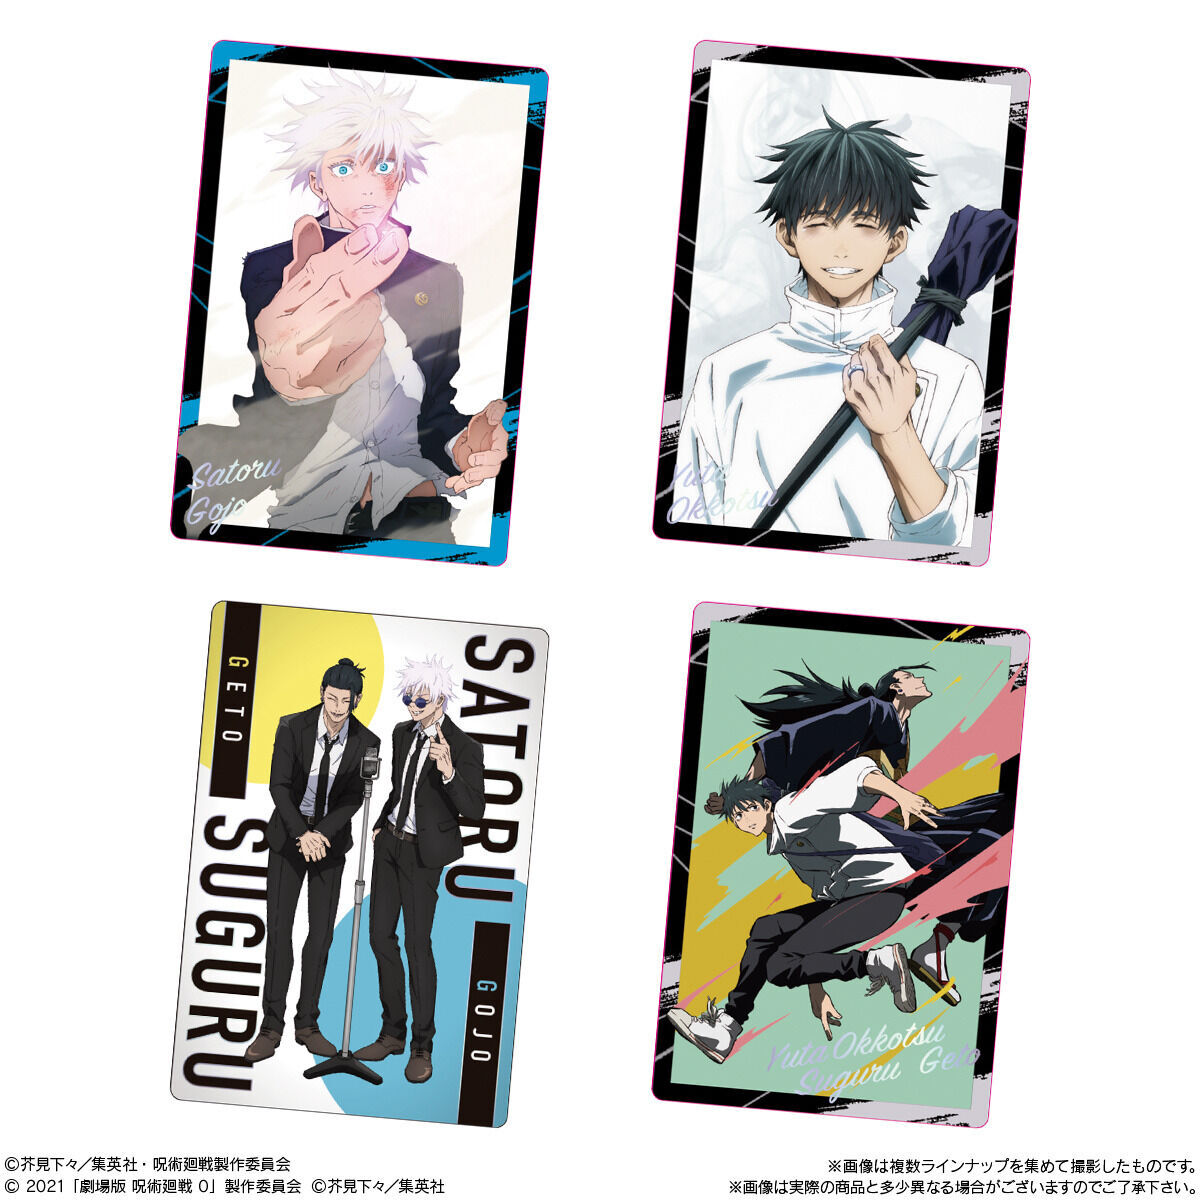 Wafer Cards Special Edition Jujutsu Kaisen Metallic Plastic Card Candy Toy BANDAI